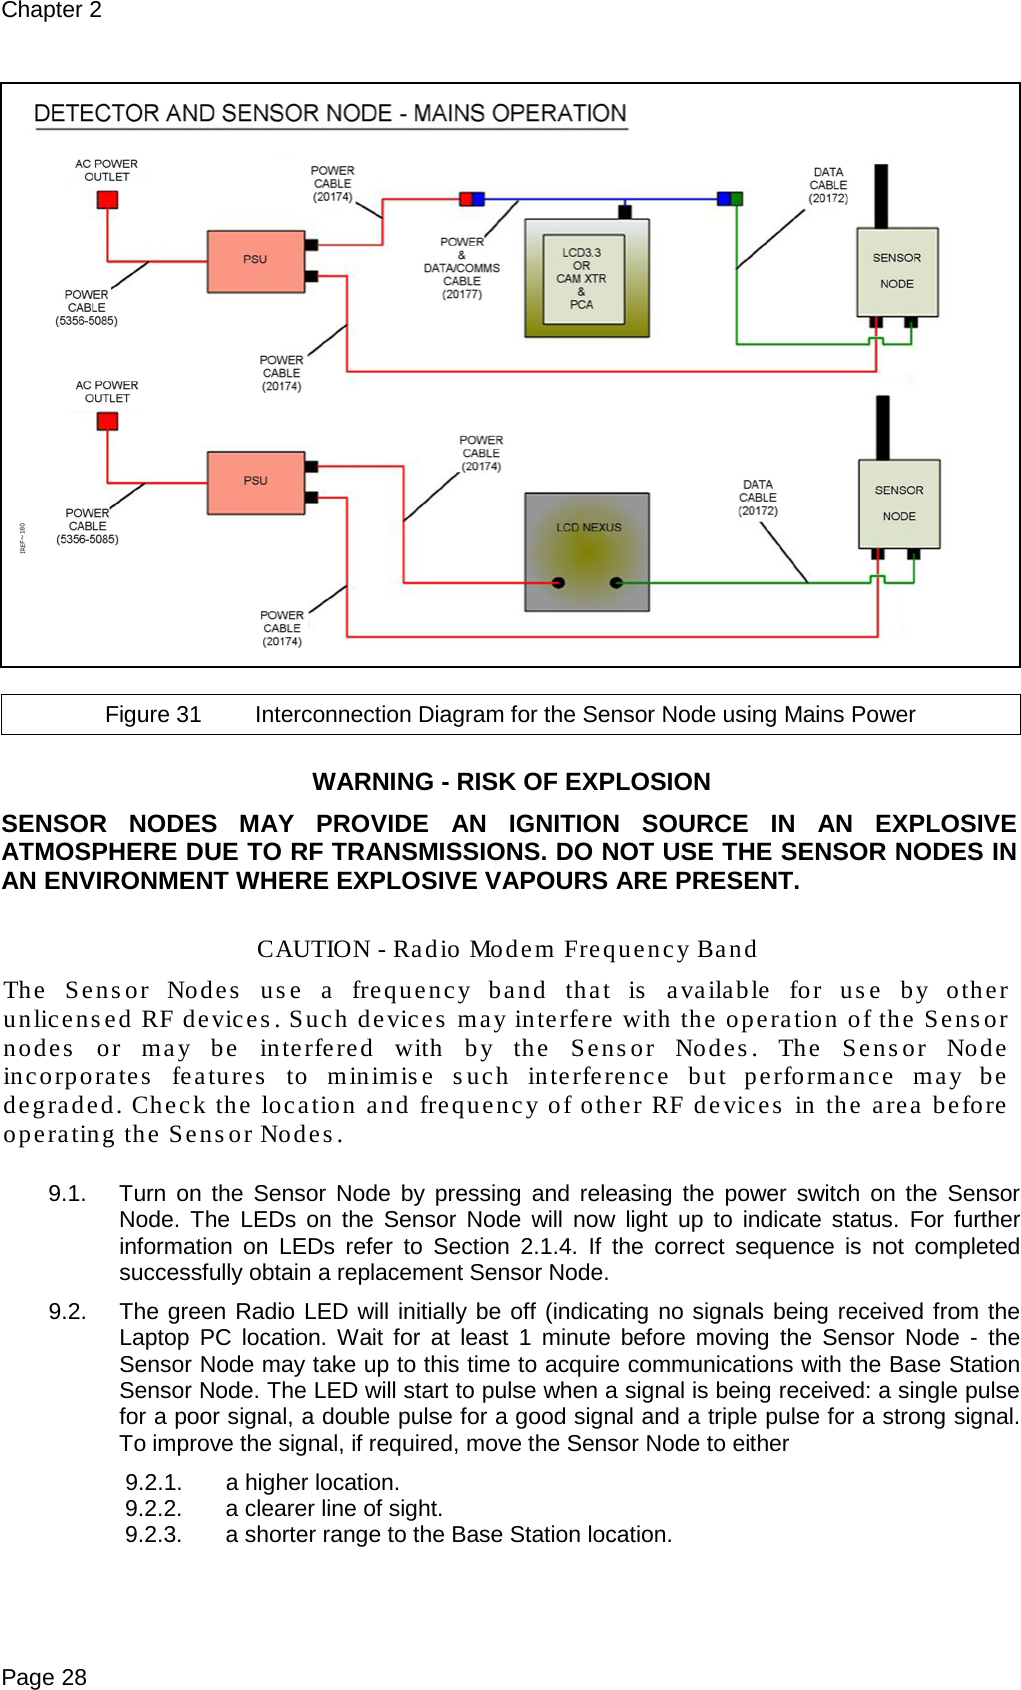 Chapter 2 Page 28    Figure 31 Interconnection Diagram for the Sensor Node using Mains Power  WARNING - RISK OF EXPLOSION SENSOR NODES MAY PROVIDE AN IGNITION SOURCE IN AN EXPLOSIVE ATMOSPHERE DUE TO RF TRANSMISSIONS. DO NOT USE THE SENSOR NODES IN AN ENVIRONMENT WHERE EXPLOSIVE VAPOURS ARE PRESENT.  CAUTION - Radio Modem Frequency Band The Sensor Nodes use a frequency band that is available for use by other unlicensed RF devices. Such devices may interfere with the operation of the Sensor nodes or may be interfered with by the Sensor Nodes. The Sensor Node incorporates  features to minimise such interference but performance may be degraded. Check the location and frequency of other RF devices in the area before operating the Sensor Nodes.  9.1. Turn on the Sensor Node by pressing and releasing the power switch on the Sensor Node.  The LEDs on the Sensor Node will now light up to indicate status. For further information on LEDs refer to Section 2.1.4.  If the correct sequence is not completed successfully obtain a replacement Sensor Node. 9.2. The green Radio LED will initially be off (indicating no signals being received from the Laptop PC location.  Wait for at least 1 minute before moving the Sensor Node -  the Sensor Node may take up to this time to acquire communications with the Base Station Sensor Node. The LED will start to pulse when a signal is being received: a single pulse for a poor signal, a double pulse for a good signal and a triple pulse for a strong signal. To improve the signal, if required, move the Sensor Node to either  9.2.1. a higher location. 9.2.2. a clearer line of sight. 9.2.3. a shorter range to the Base Station location.  